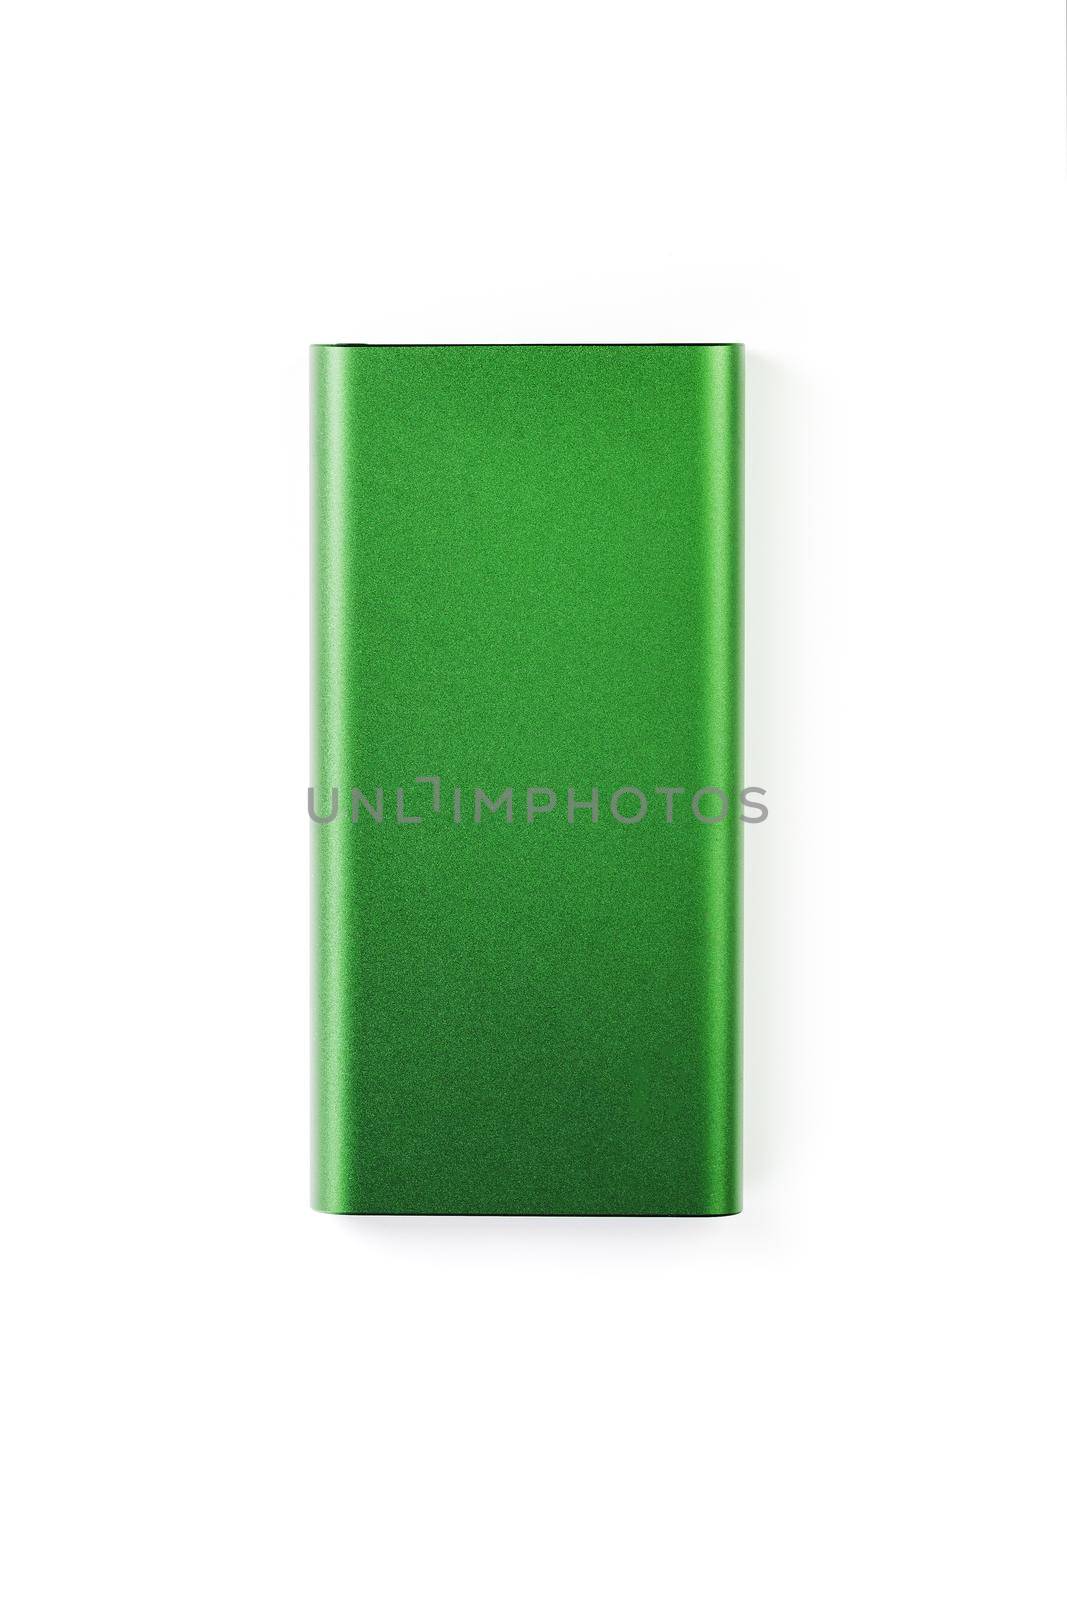 Green Power Bank on a white background for charging mobile devices by AlexGrec